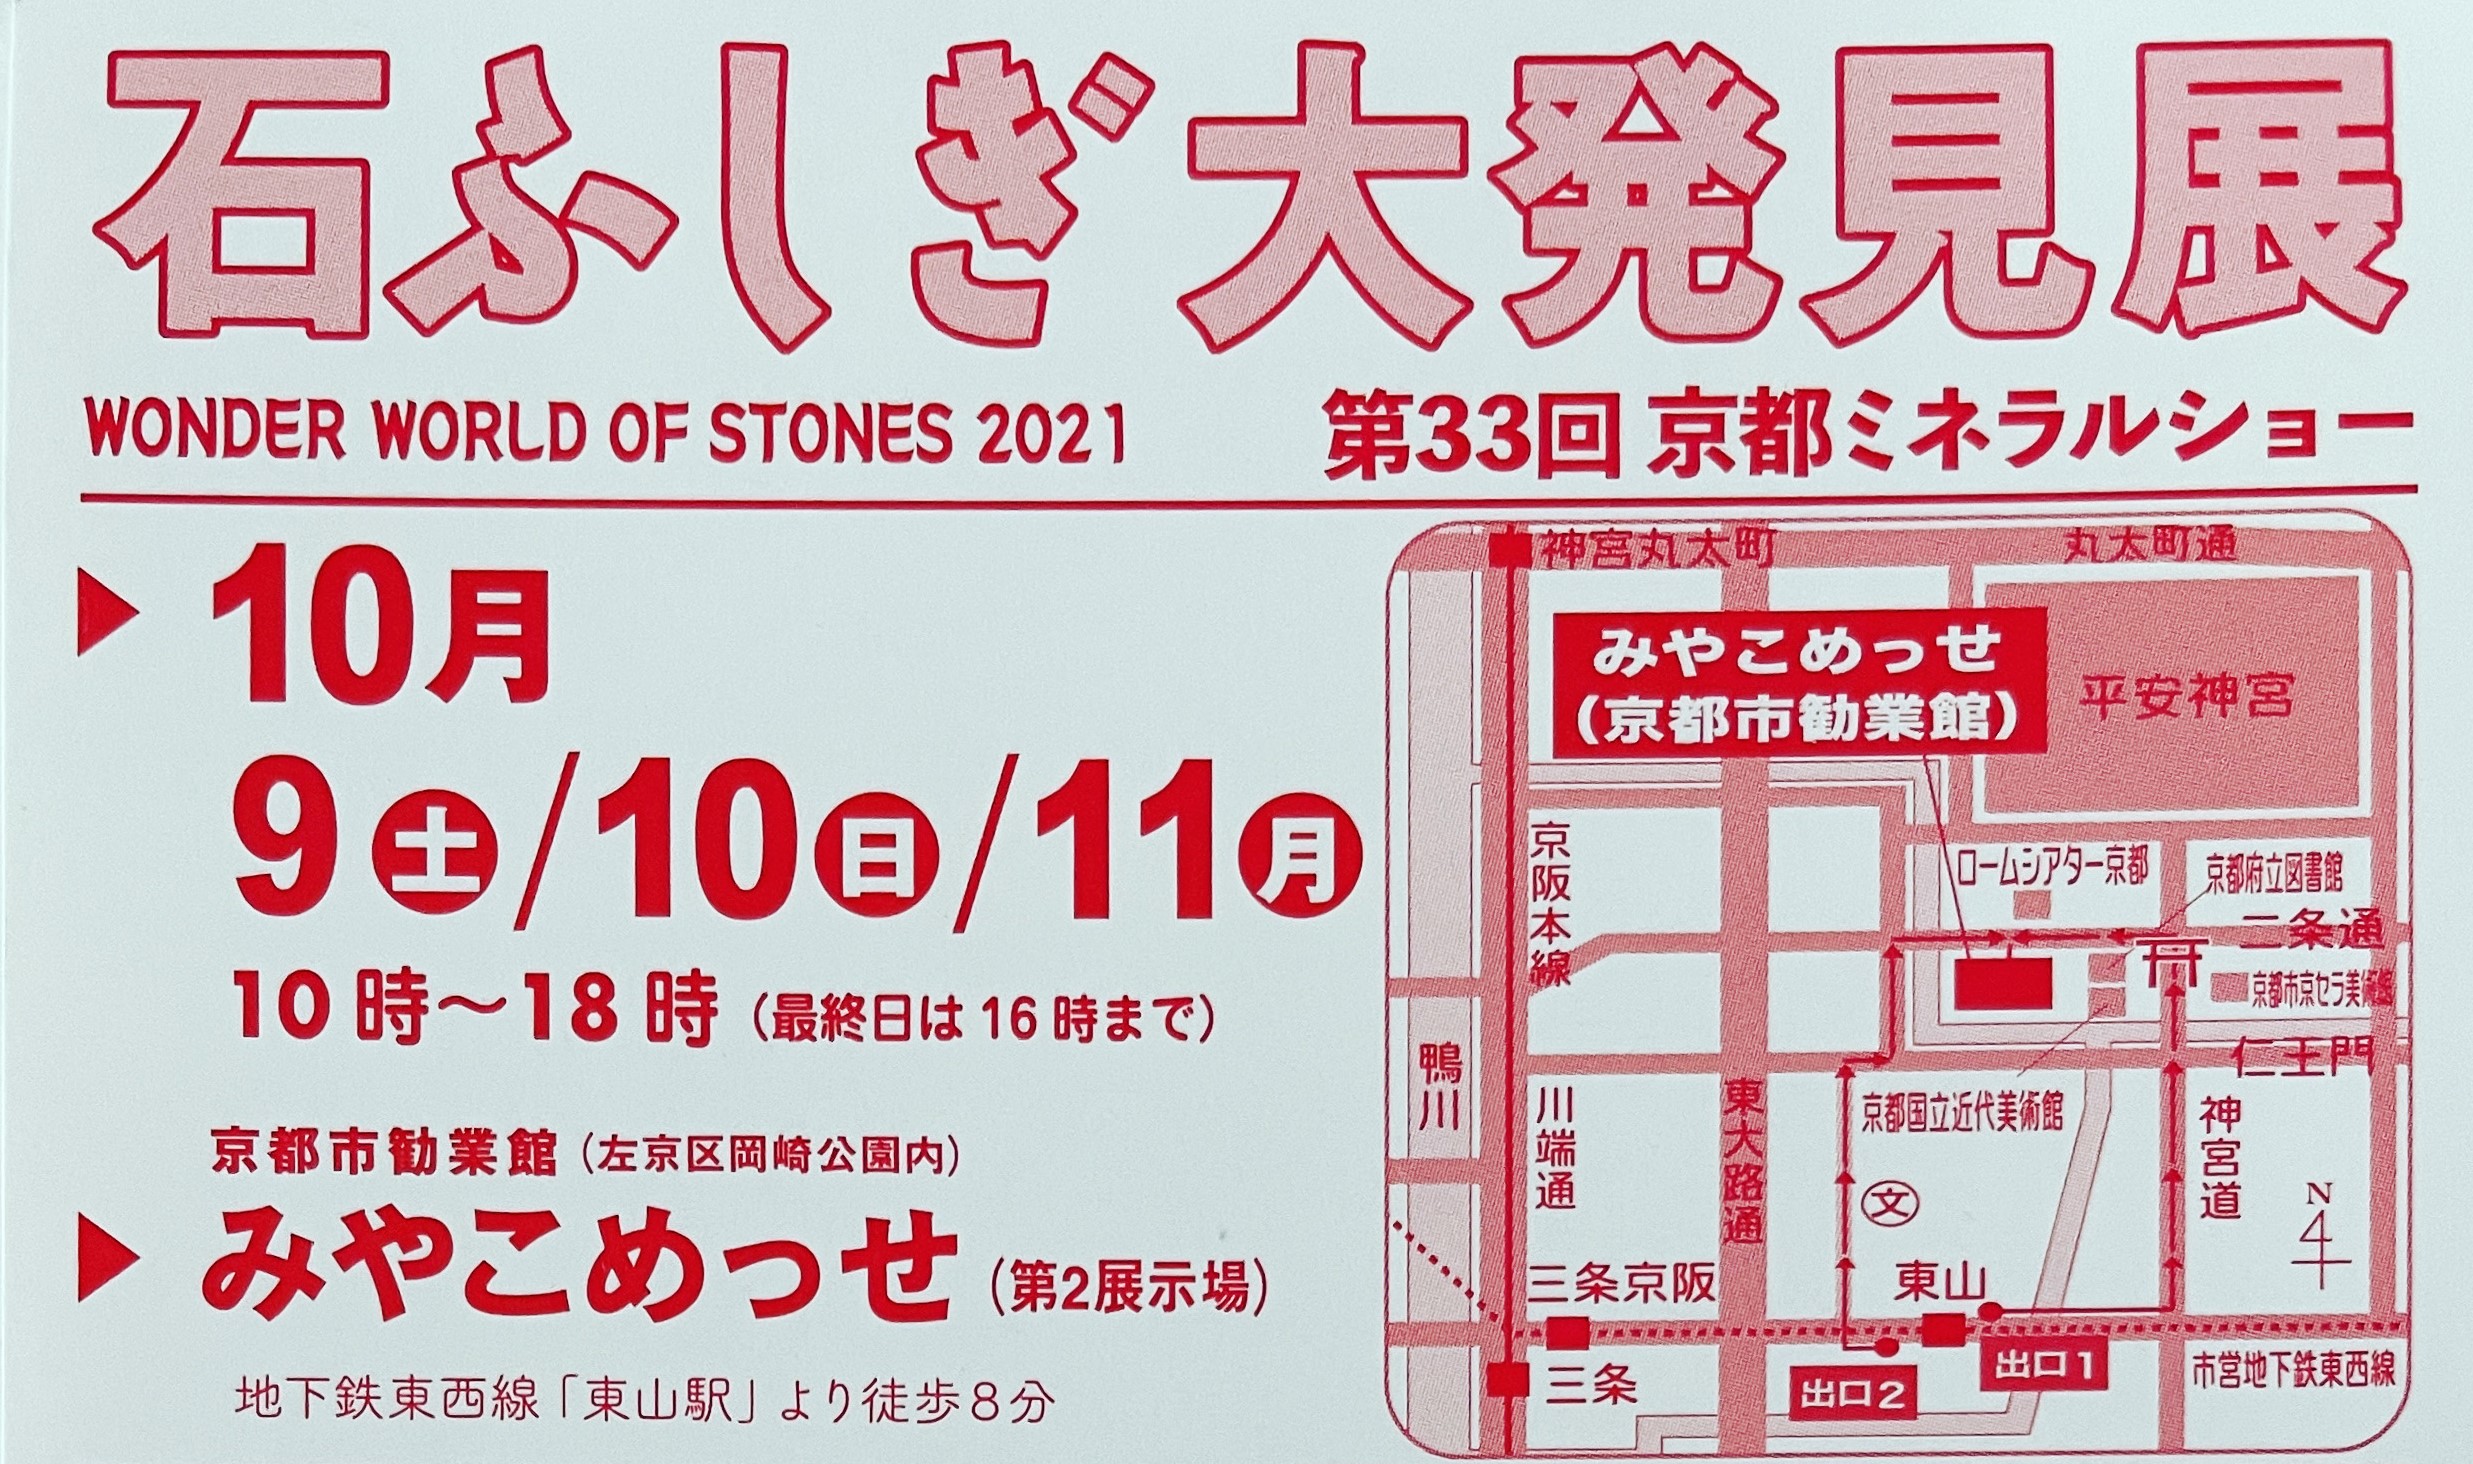 Kyoto Mineral Show